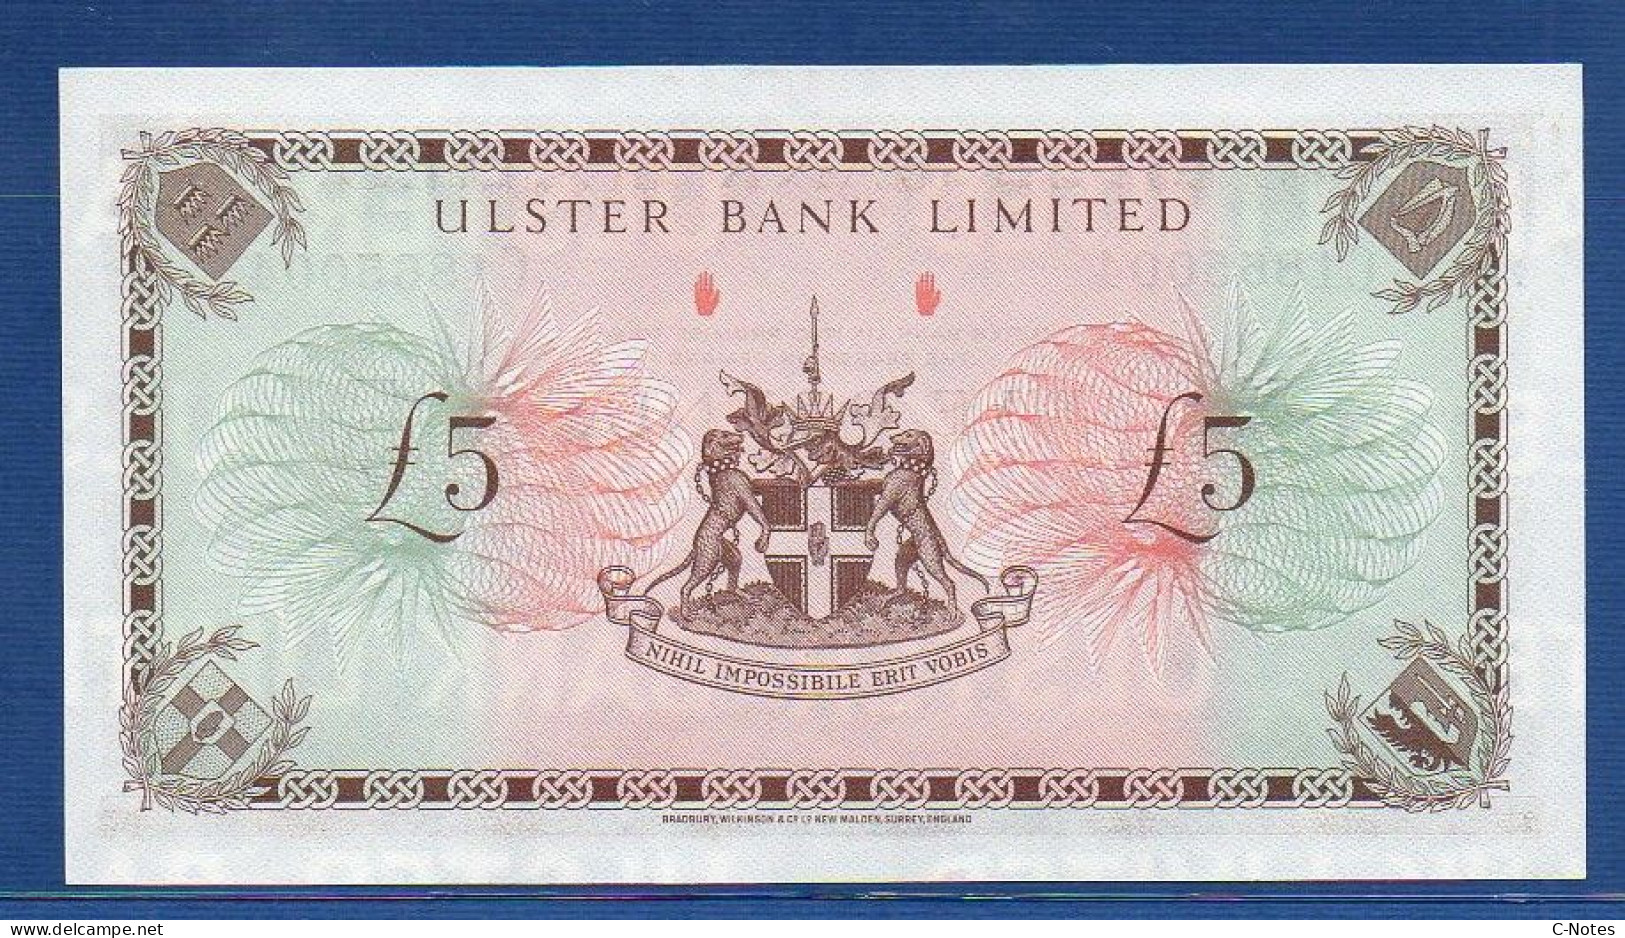 NORTHERN IRELAND - P.326c – 5 POUNDS 01.02.1988 UNC, S/n C1865004 Ulster Bank Limited - 5 Pond